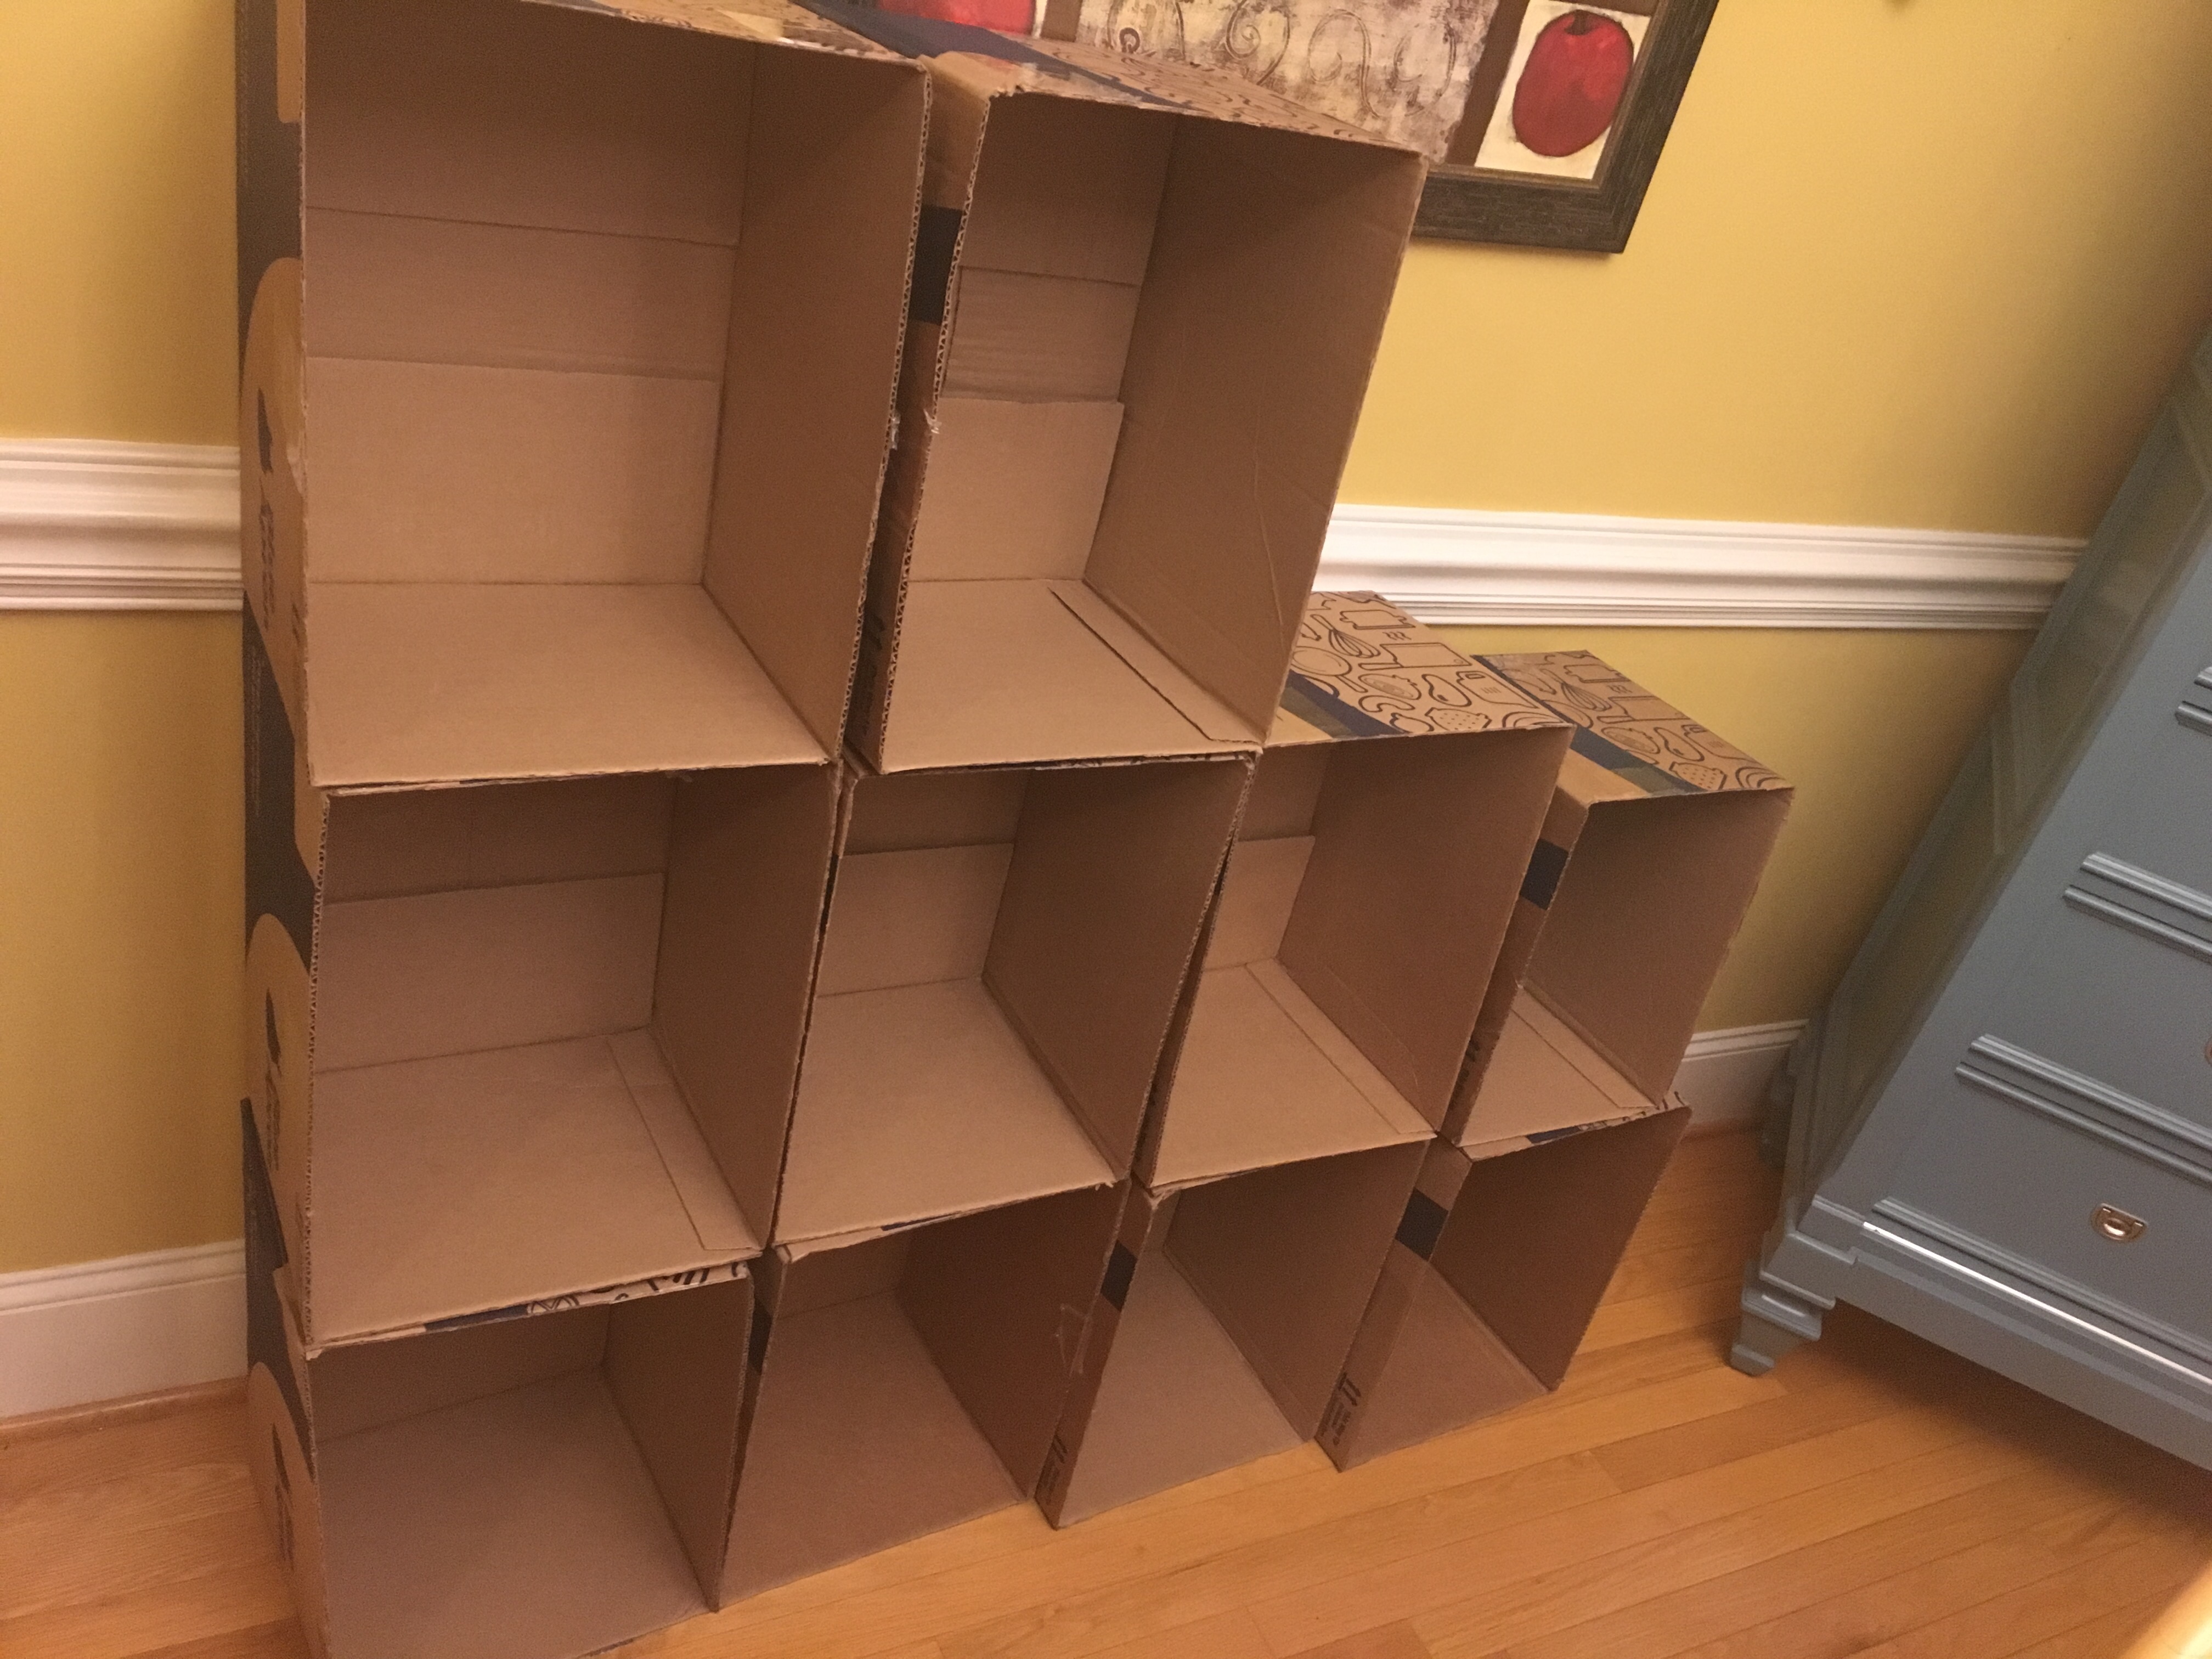 DIY Shelving from (gasp!) Cardboard Boxes?! â€